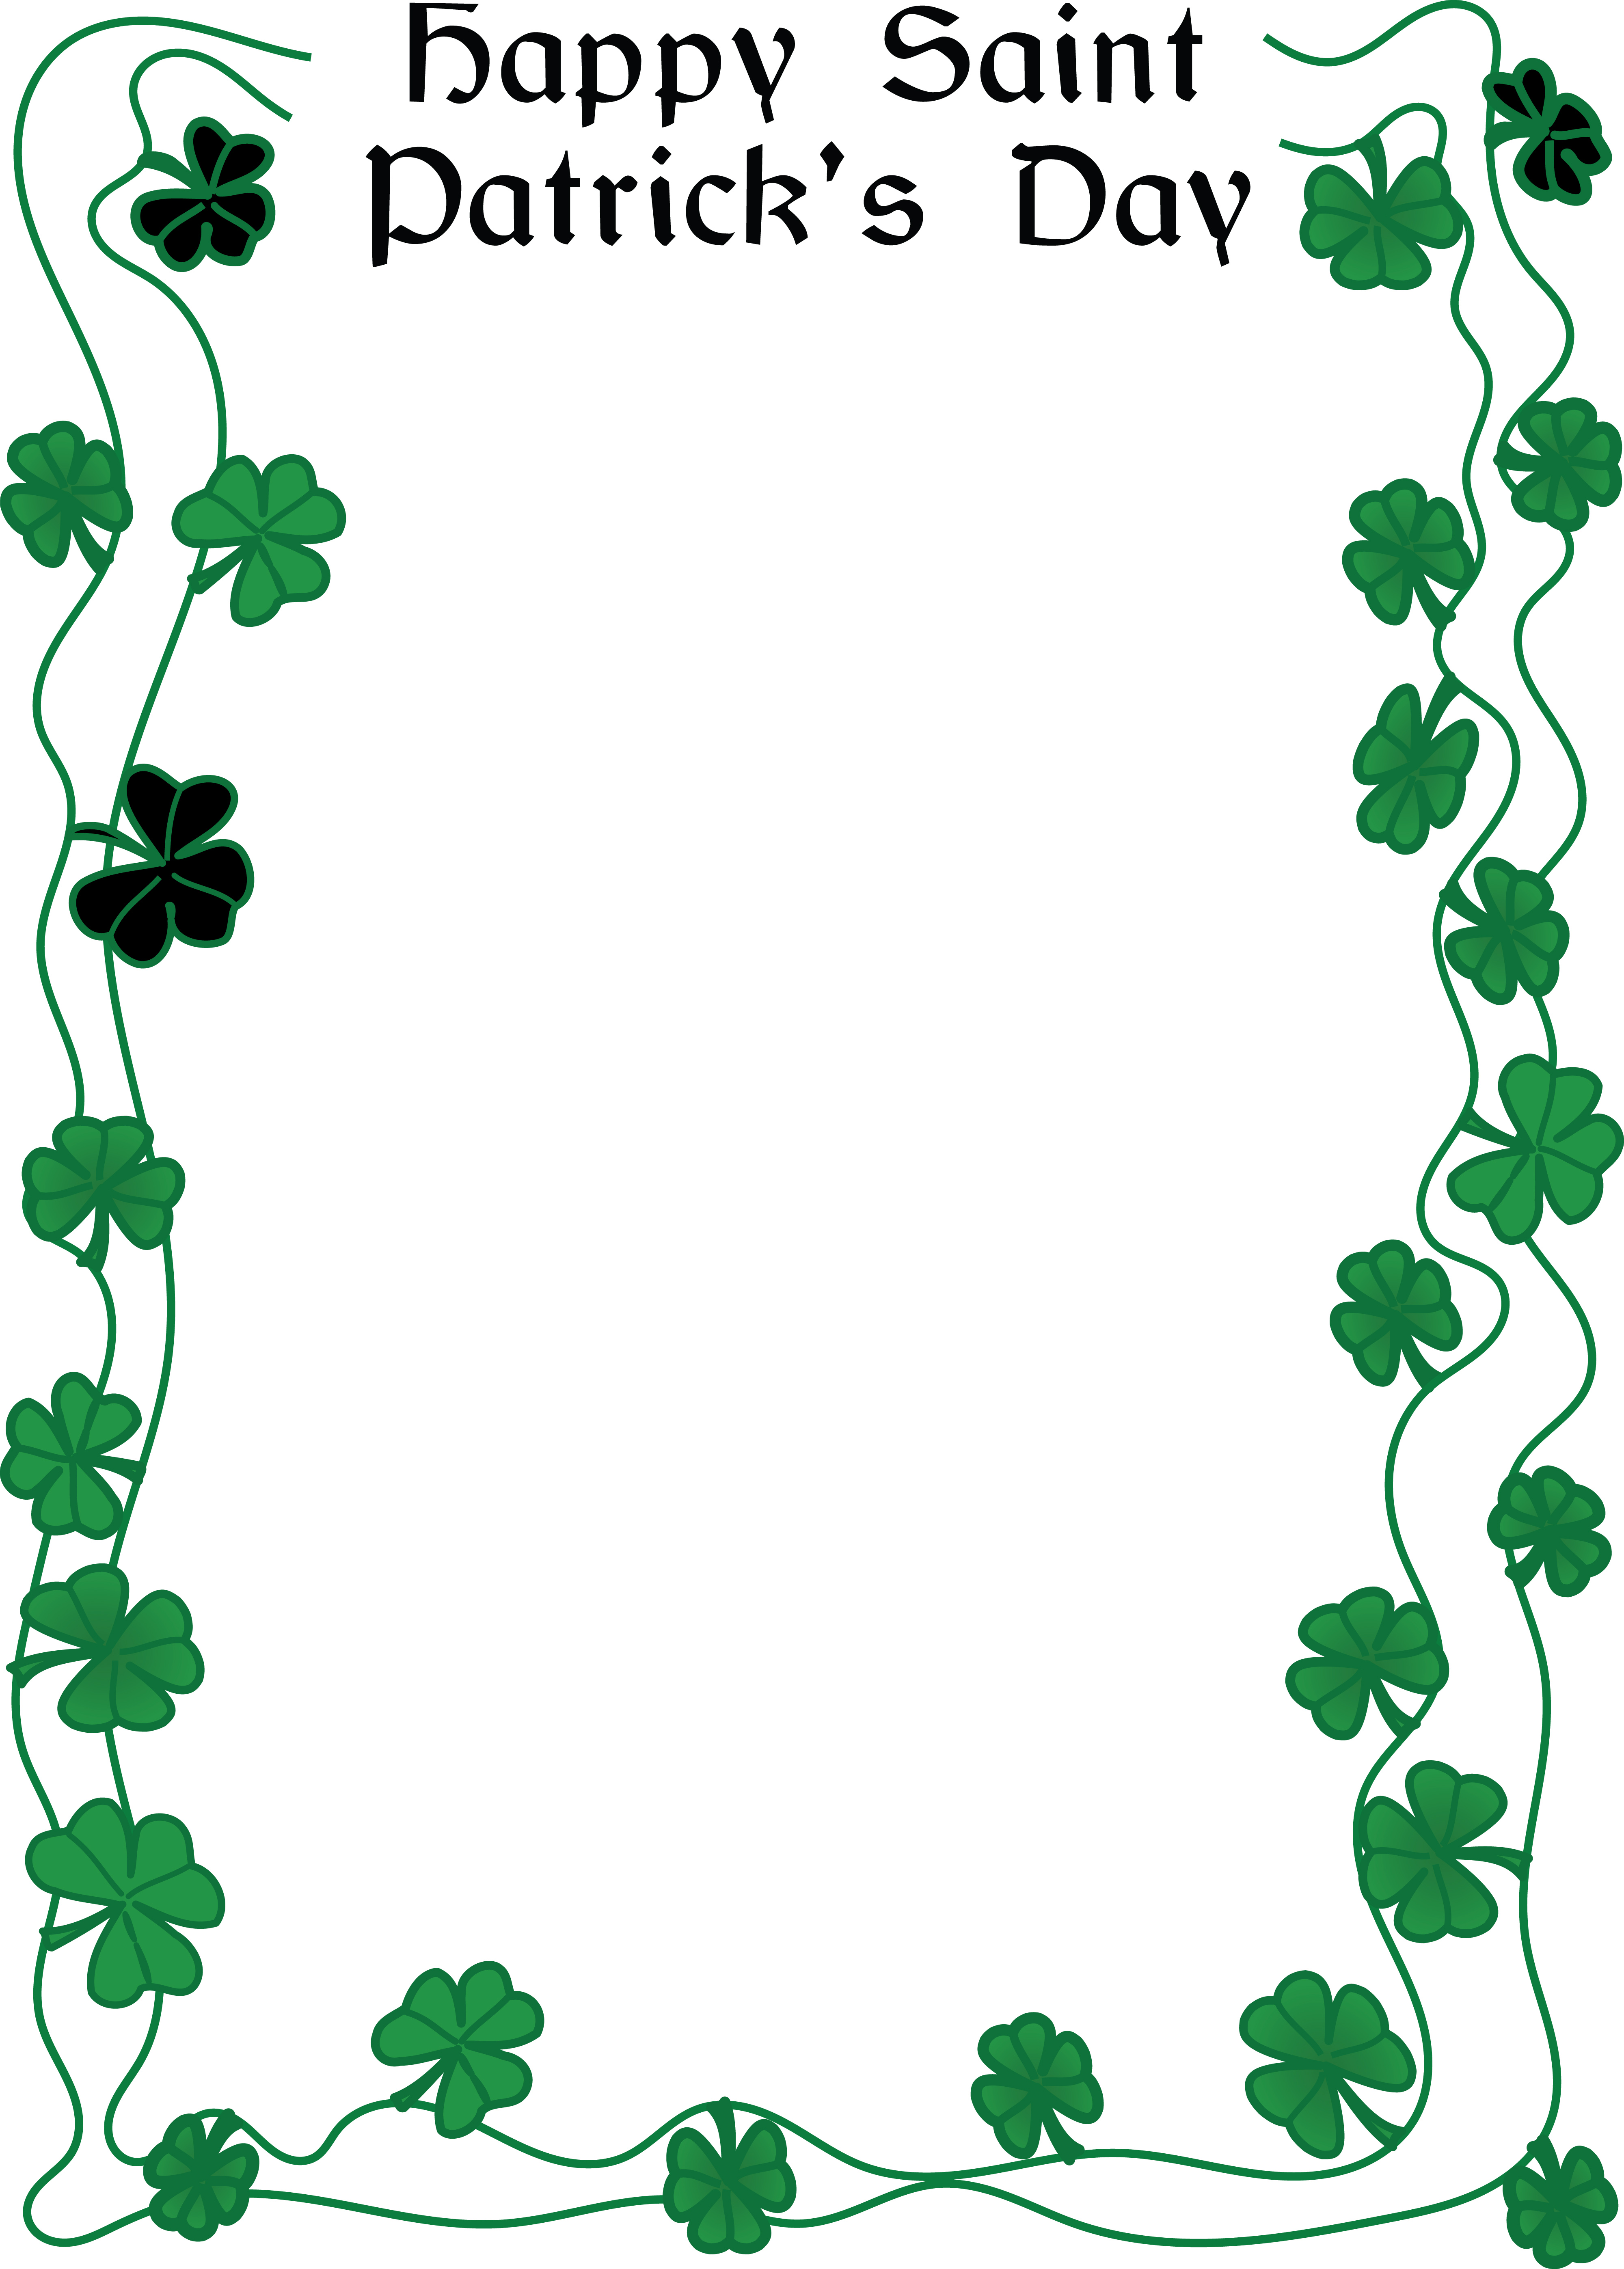 Free Clipart Of A Happy St Patricks Day Greeting and Shamrock Clover.